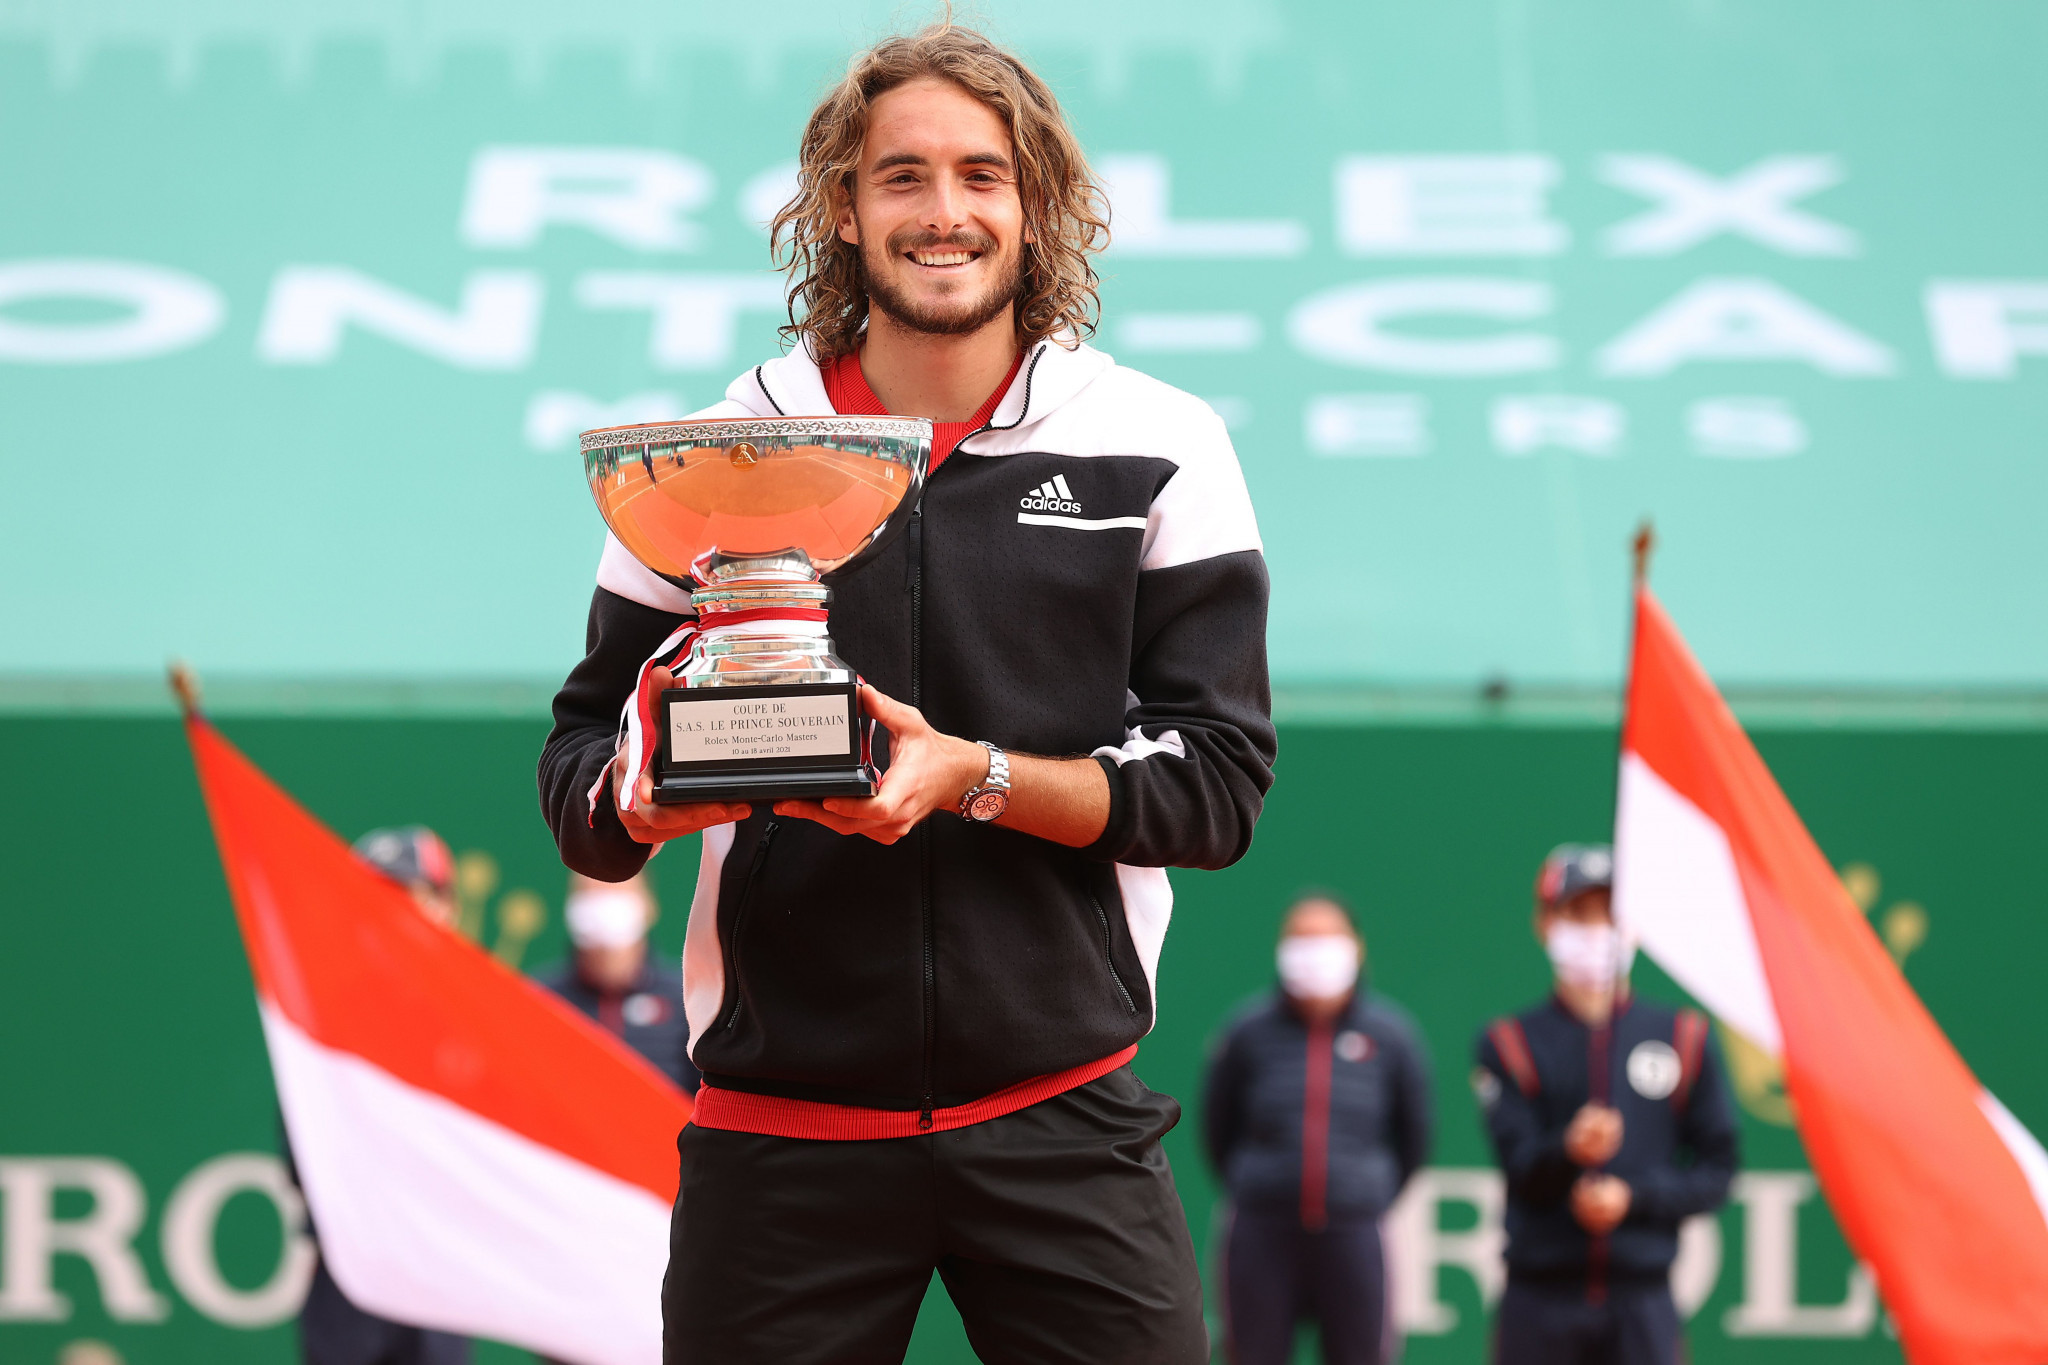 Tsitsipas seals first ATP Masters 1000 title with win over Rublev in Monte-Carlo